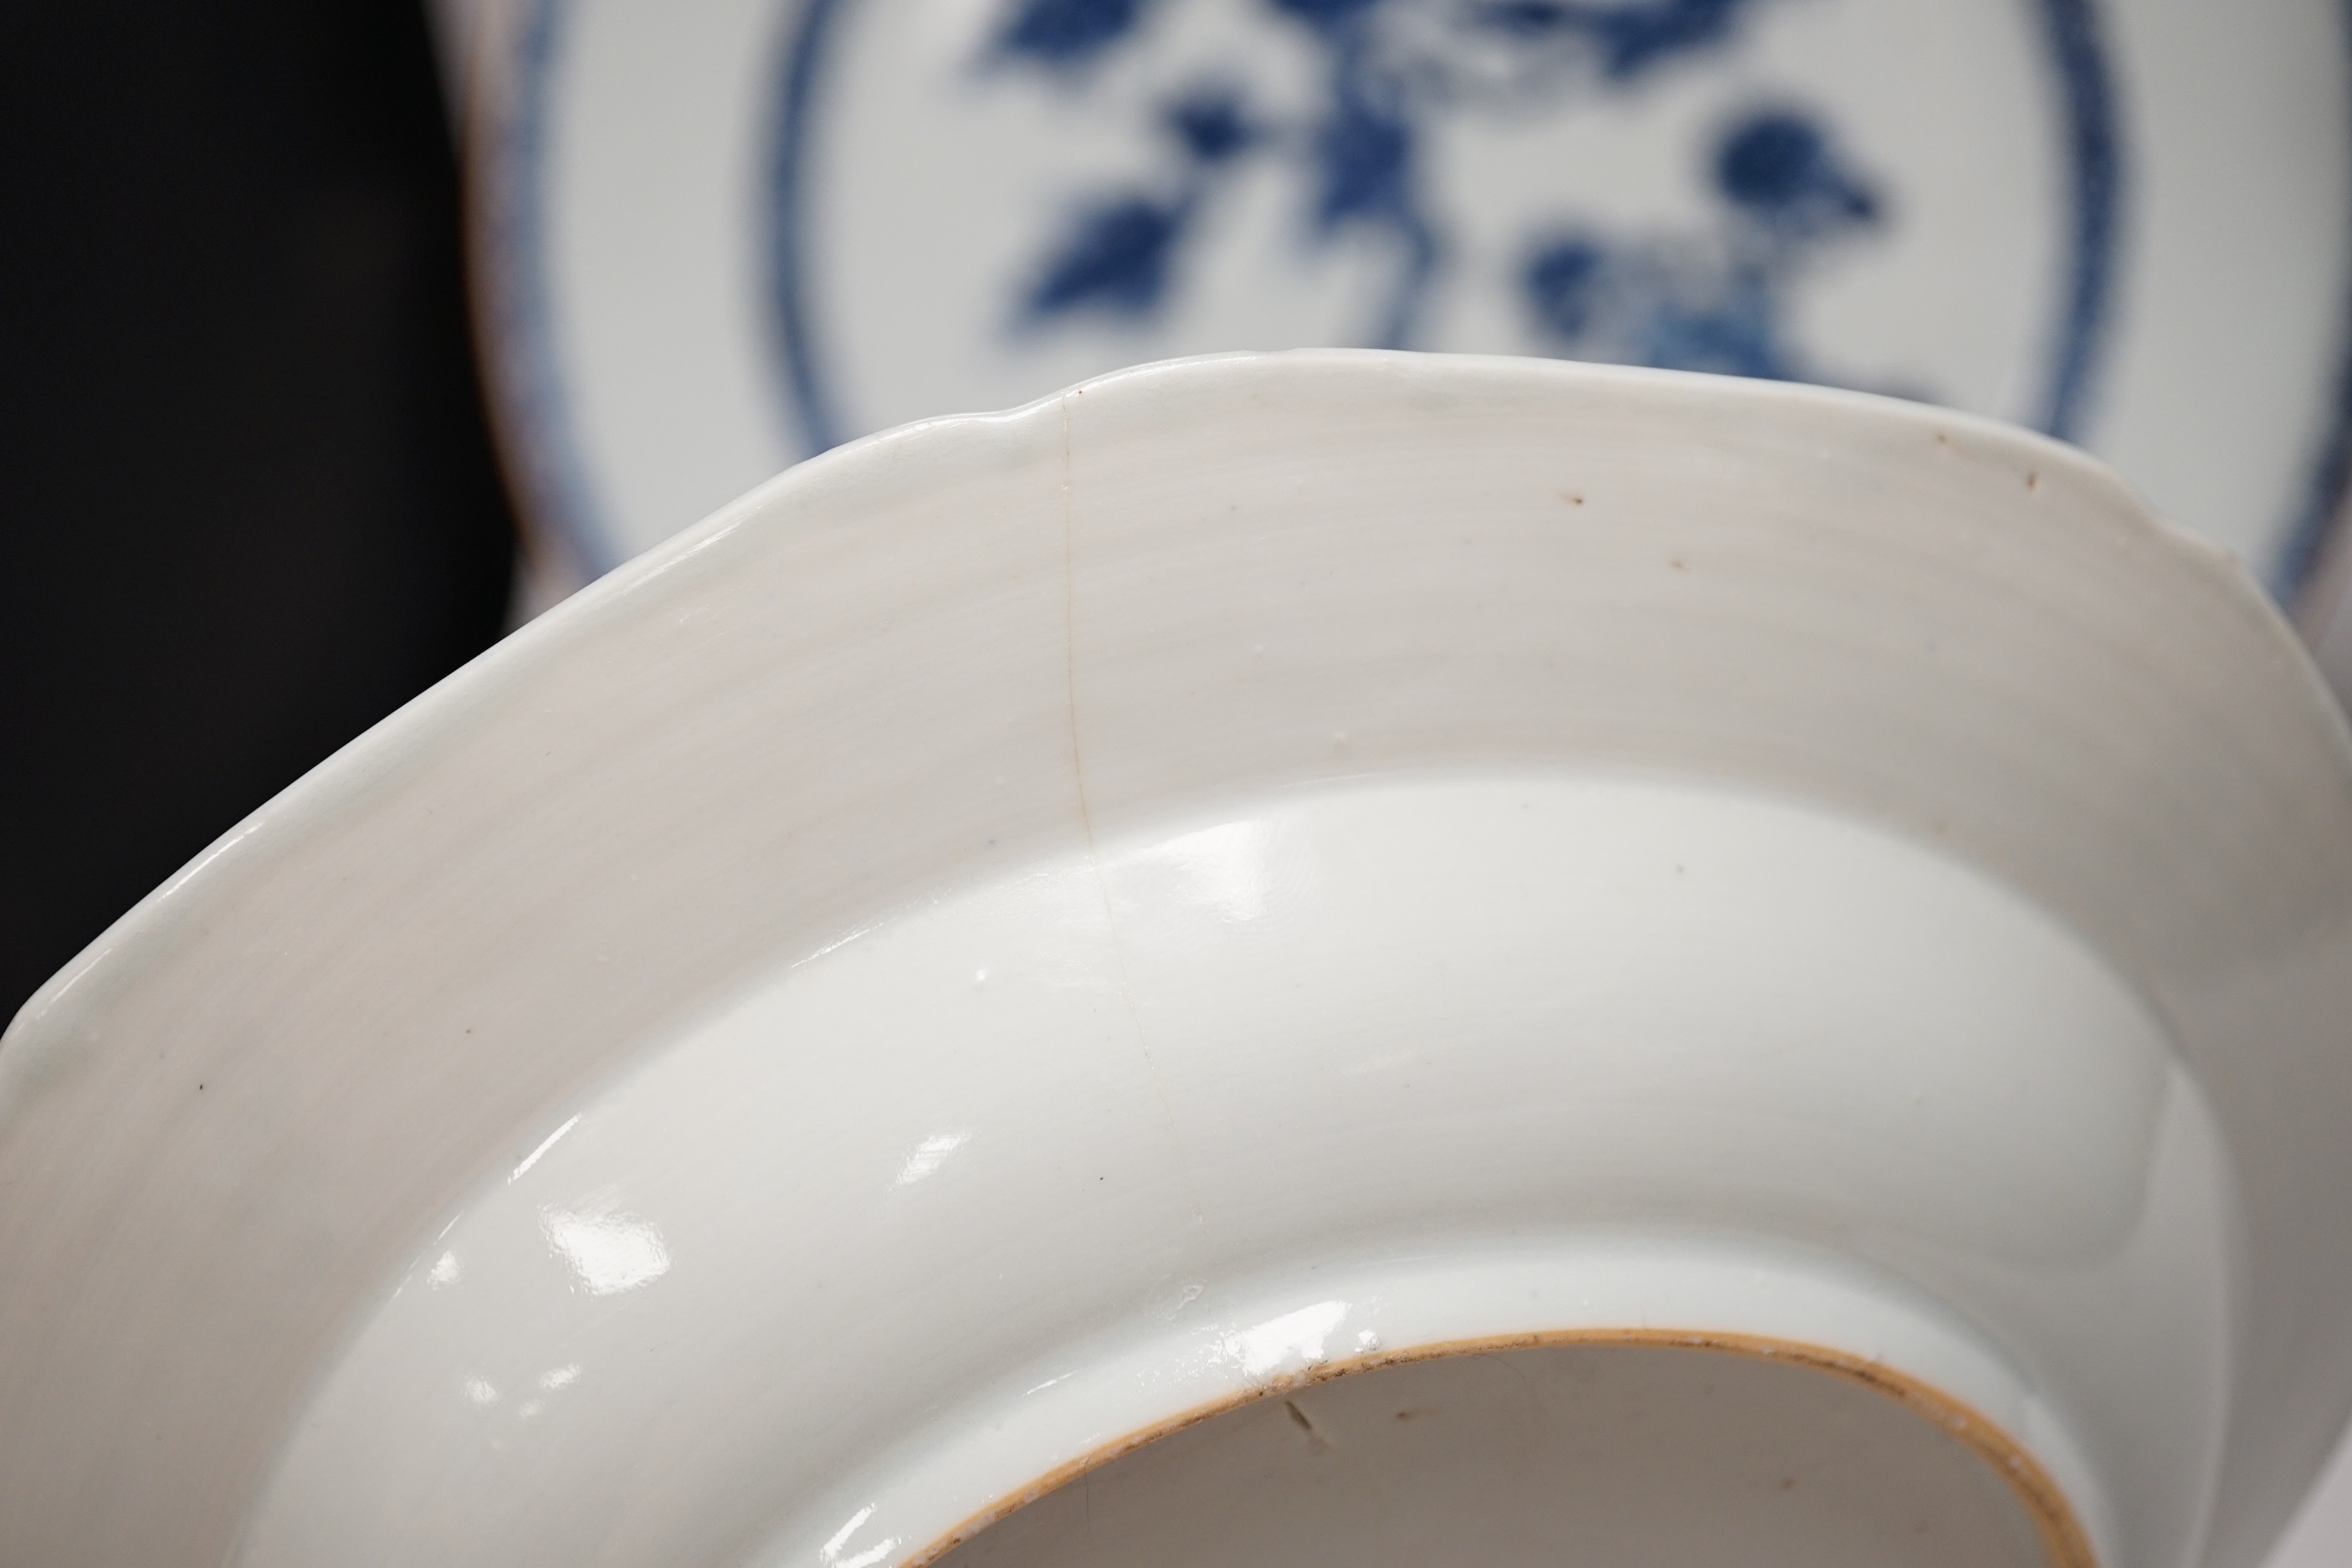 An 18th century Chinese export blue and white charger, a similar soup bowl and a late 19th century enamelled blue ground vase, 32cm